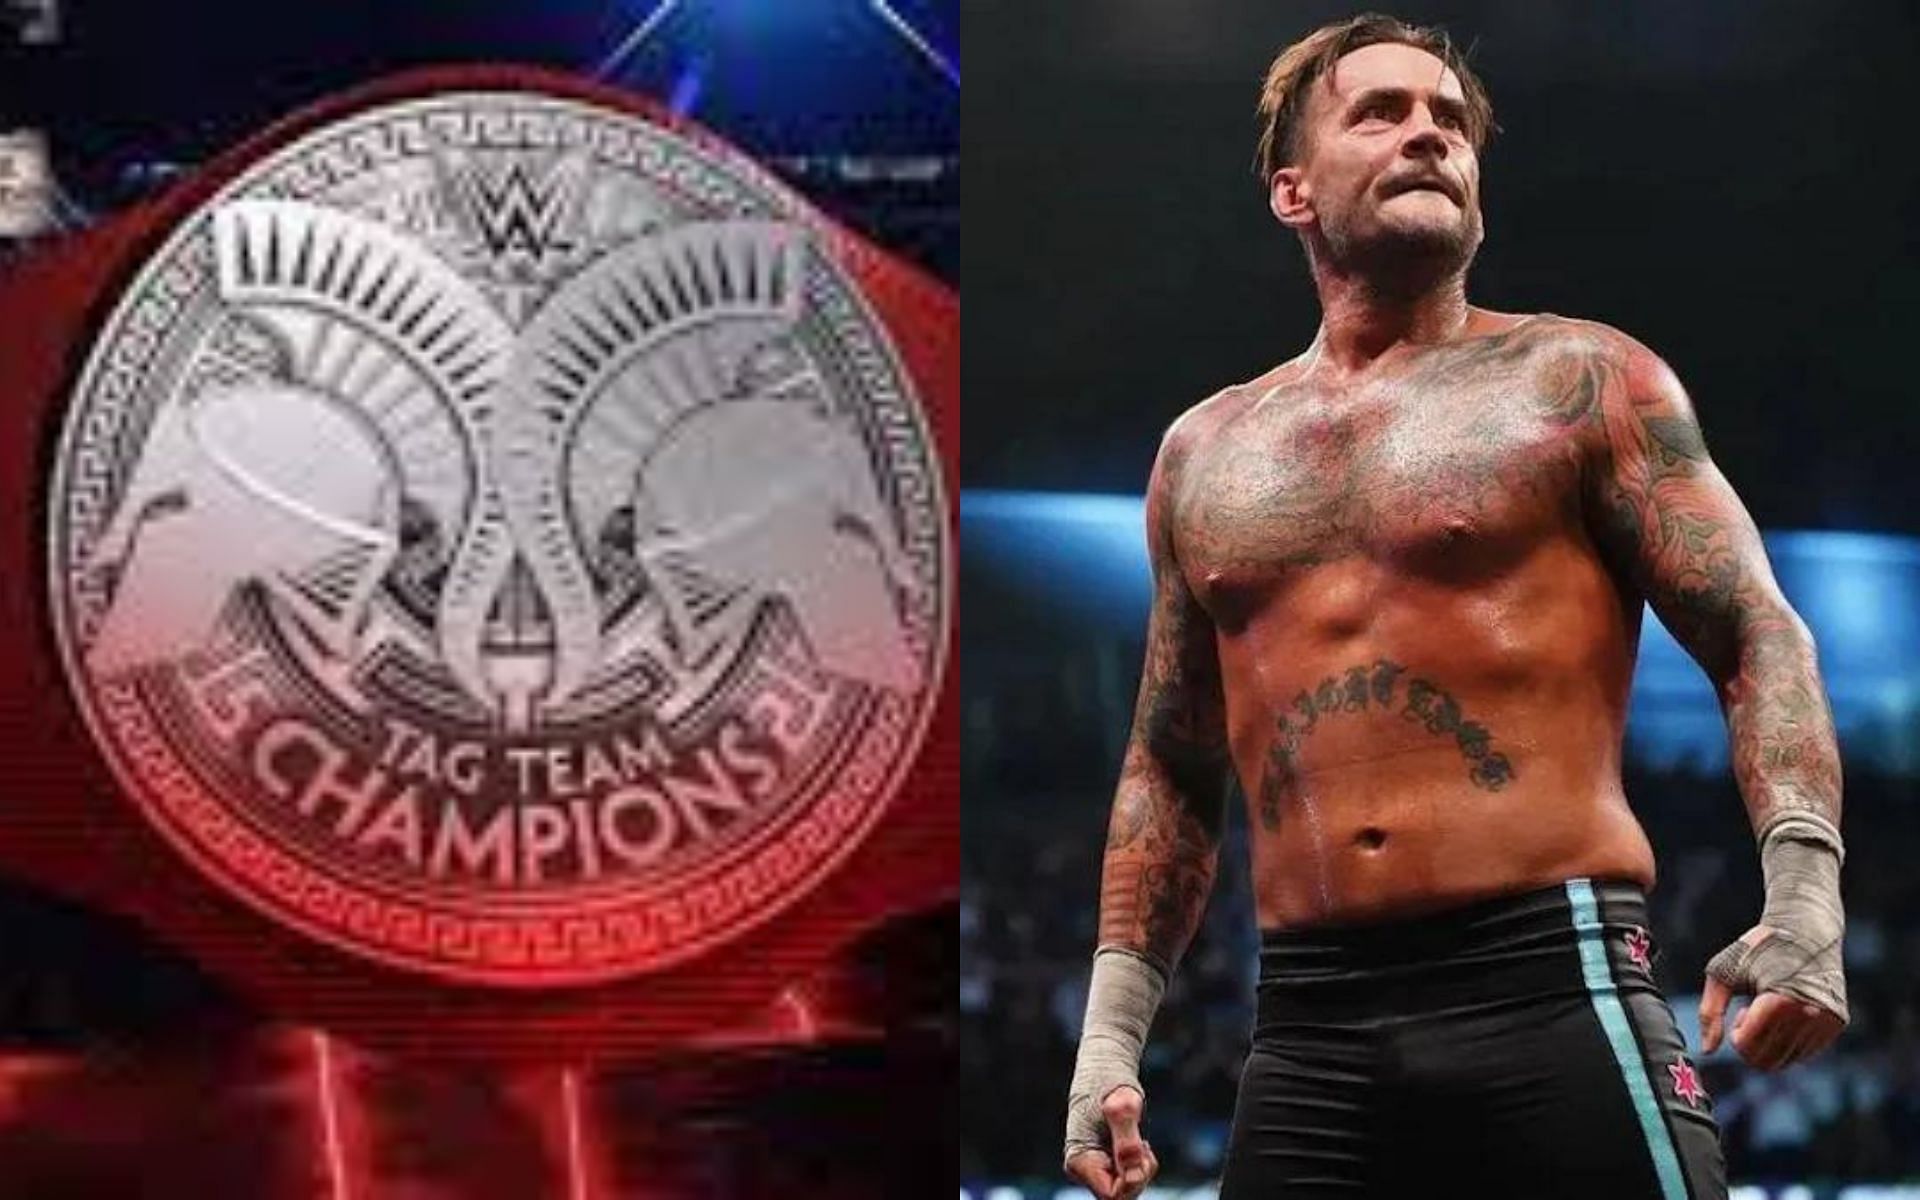 CM Punk was associated with WWE for nearly 13 years before his controversial departure